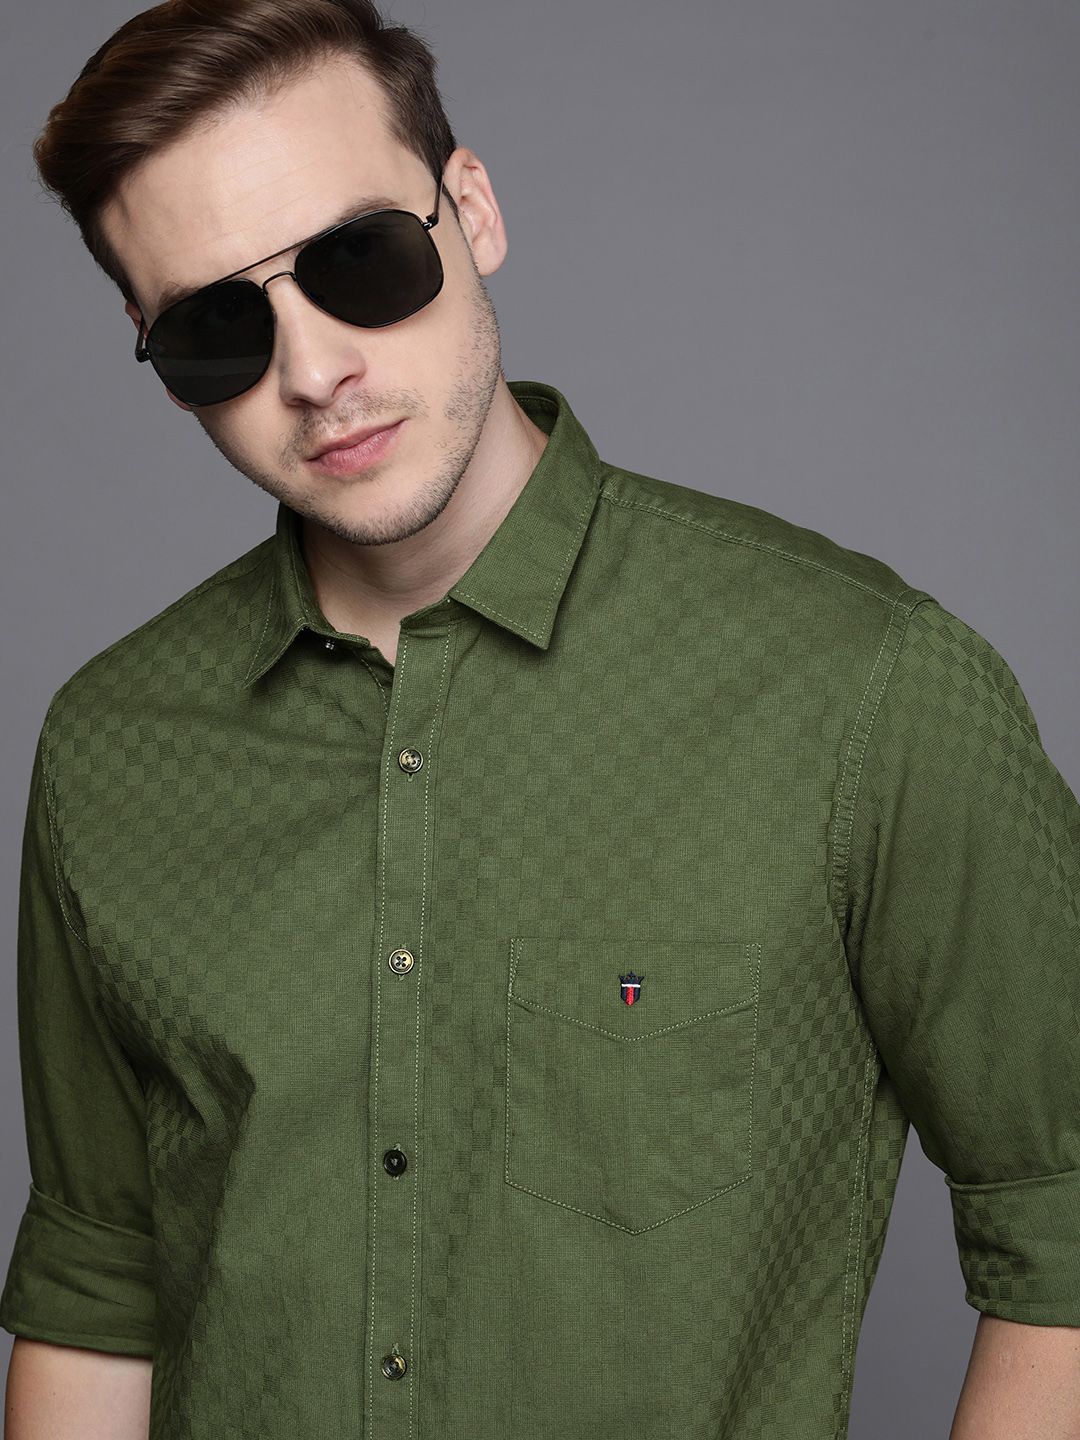 Buy Louis Philippe Louis Philippe Opaque Formal Shirt at Redfynd